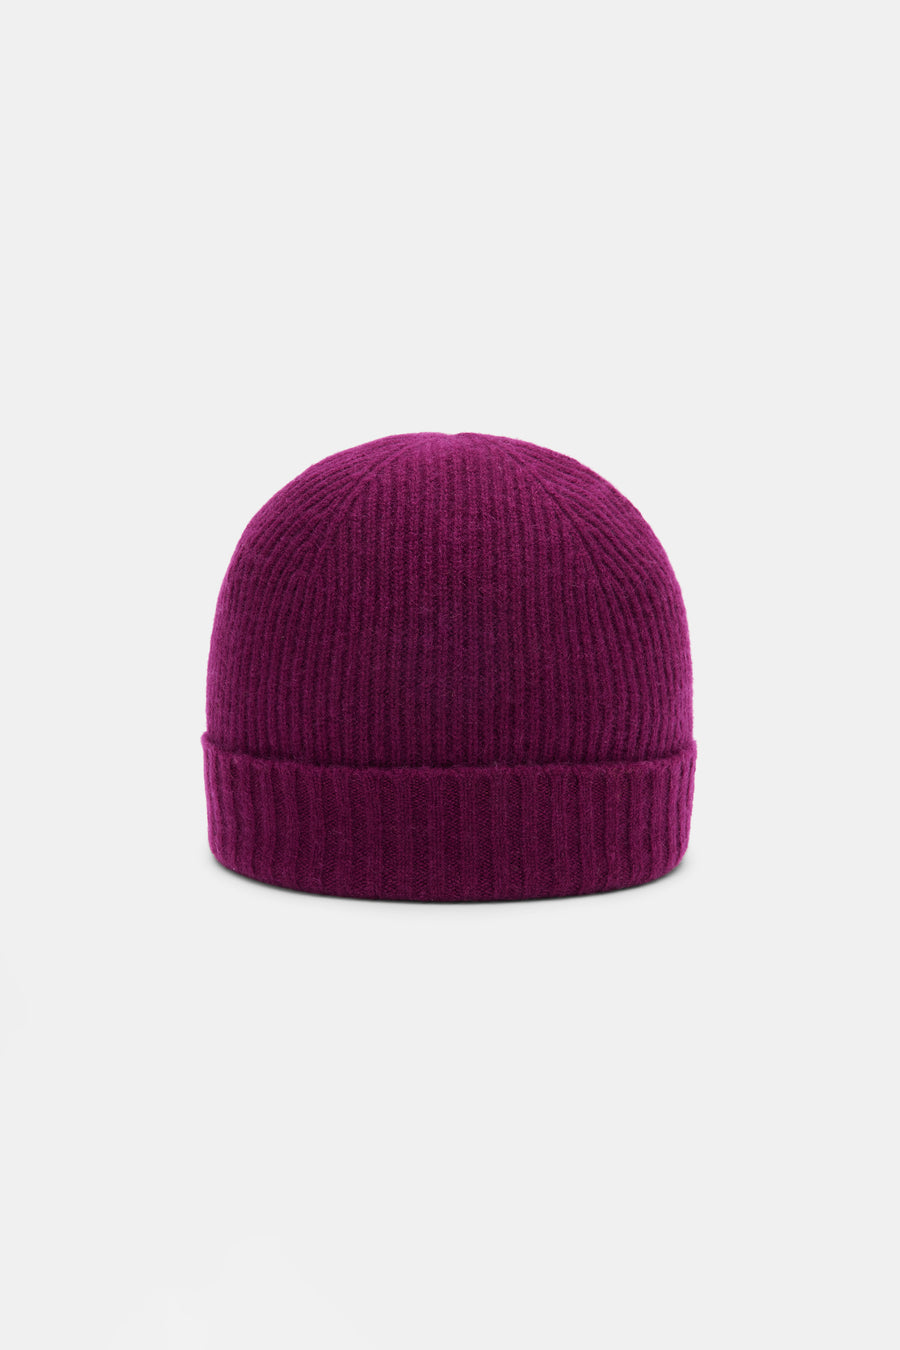 Colby Recycled Cashmere Beanie - Syrah